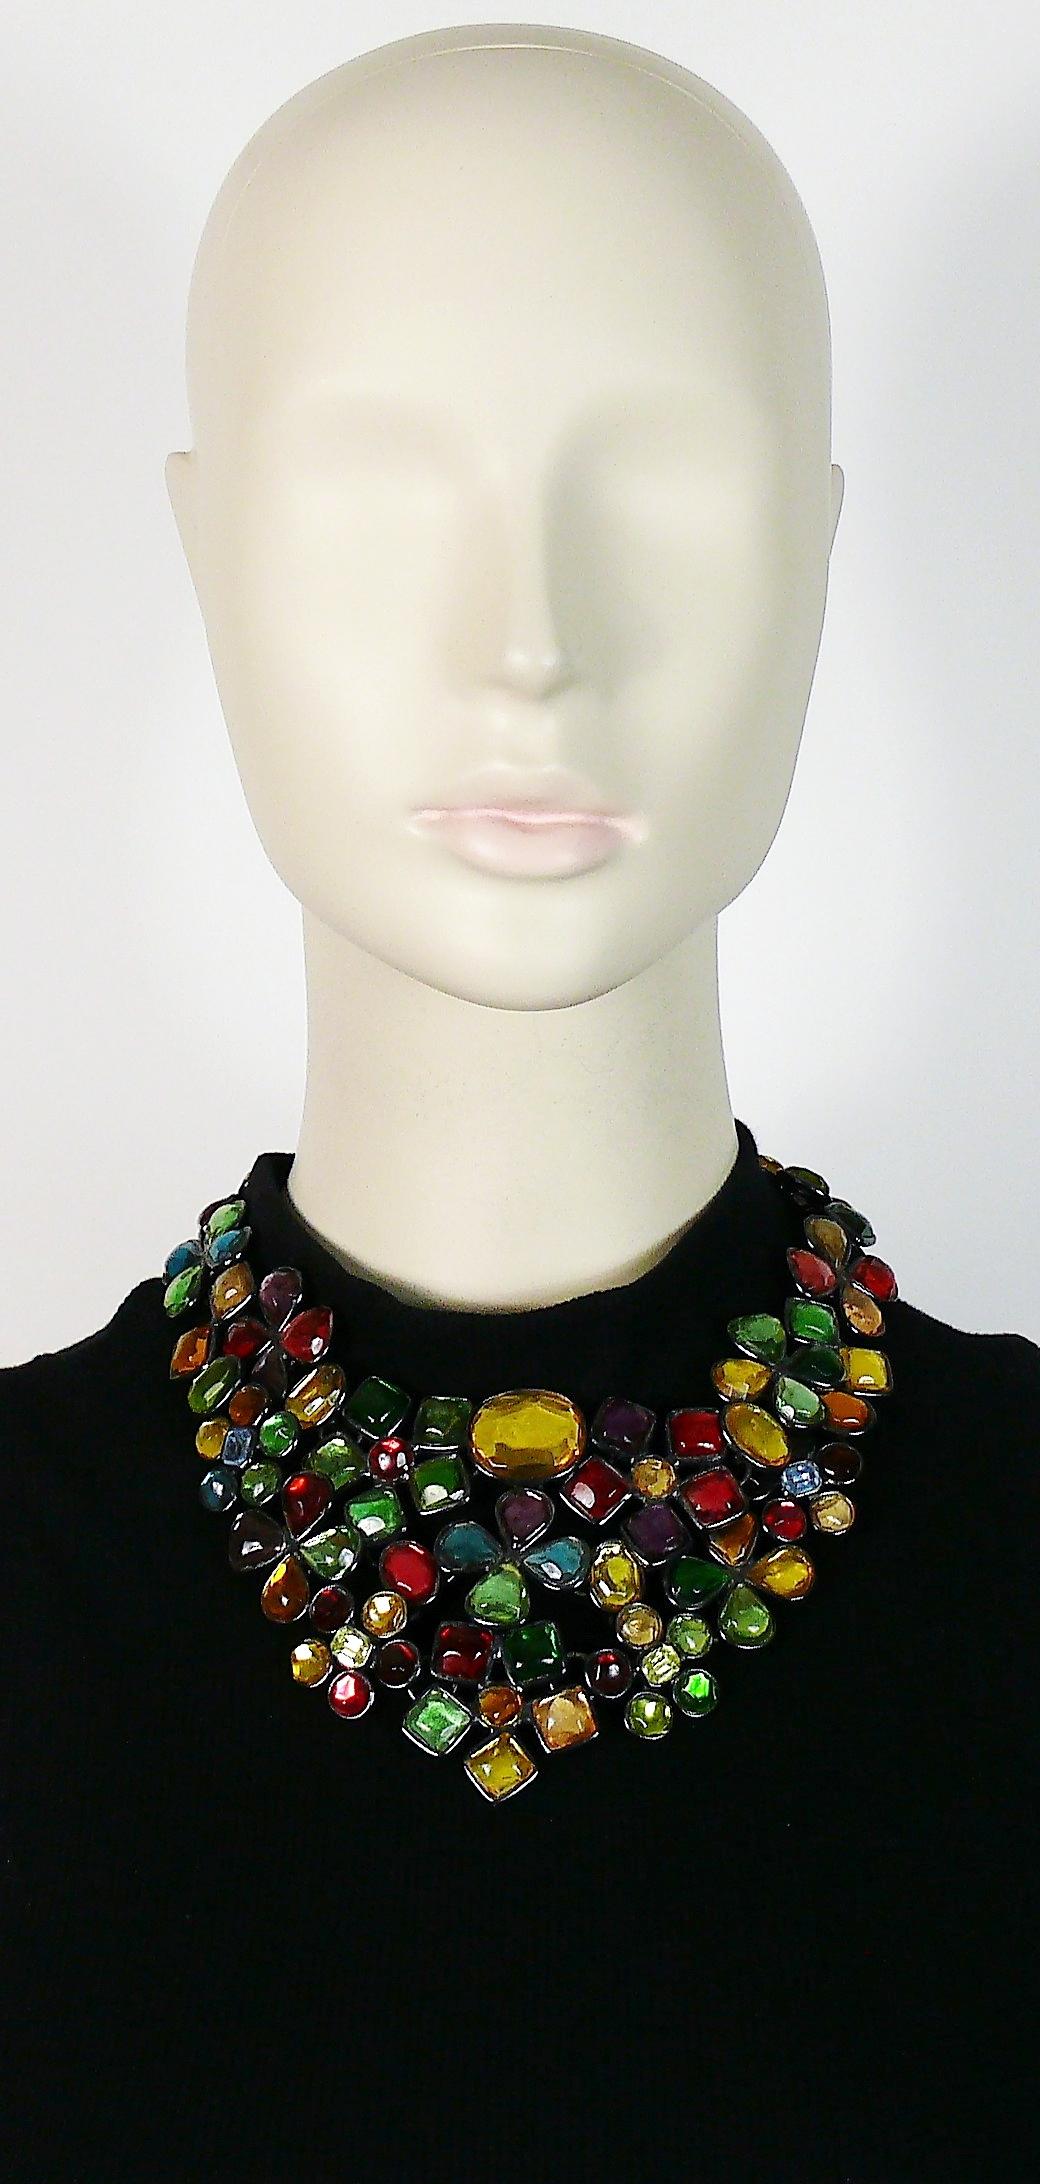 YVES SAINT LAURENT vintage rare opulent bib necklace featuring stylized resin flowers in various sizes and colours embellished with crystals in a gun patina setting.

Adjustable hook closure

Embossed YSL Made in France.

Indicative measurements :